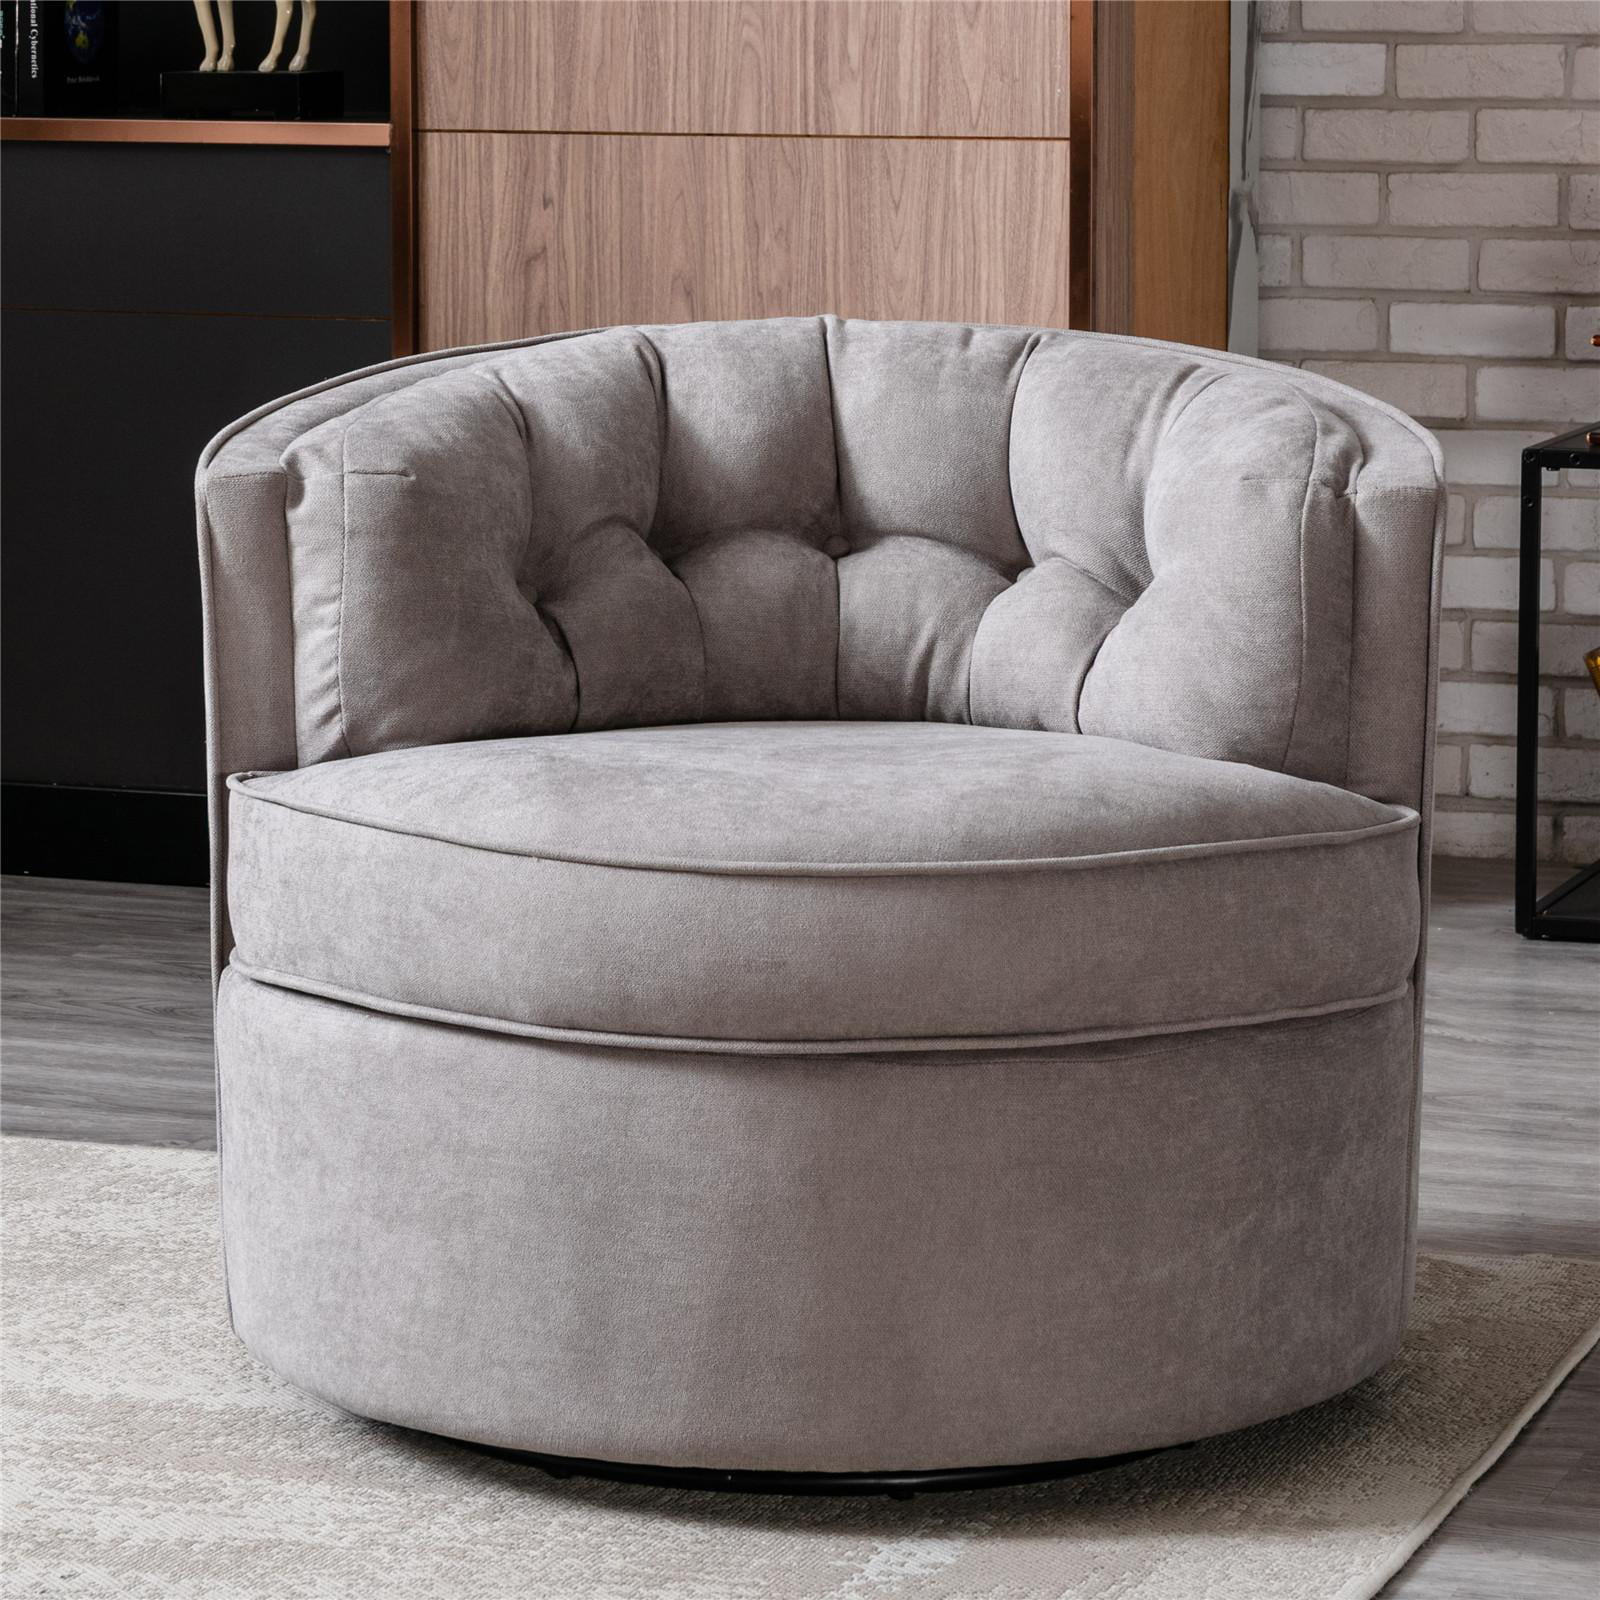 Swivel Barrel Chair Comfy Tufted, Leather Swivel Barrel Chair With Ottoman